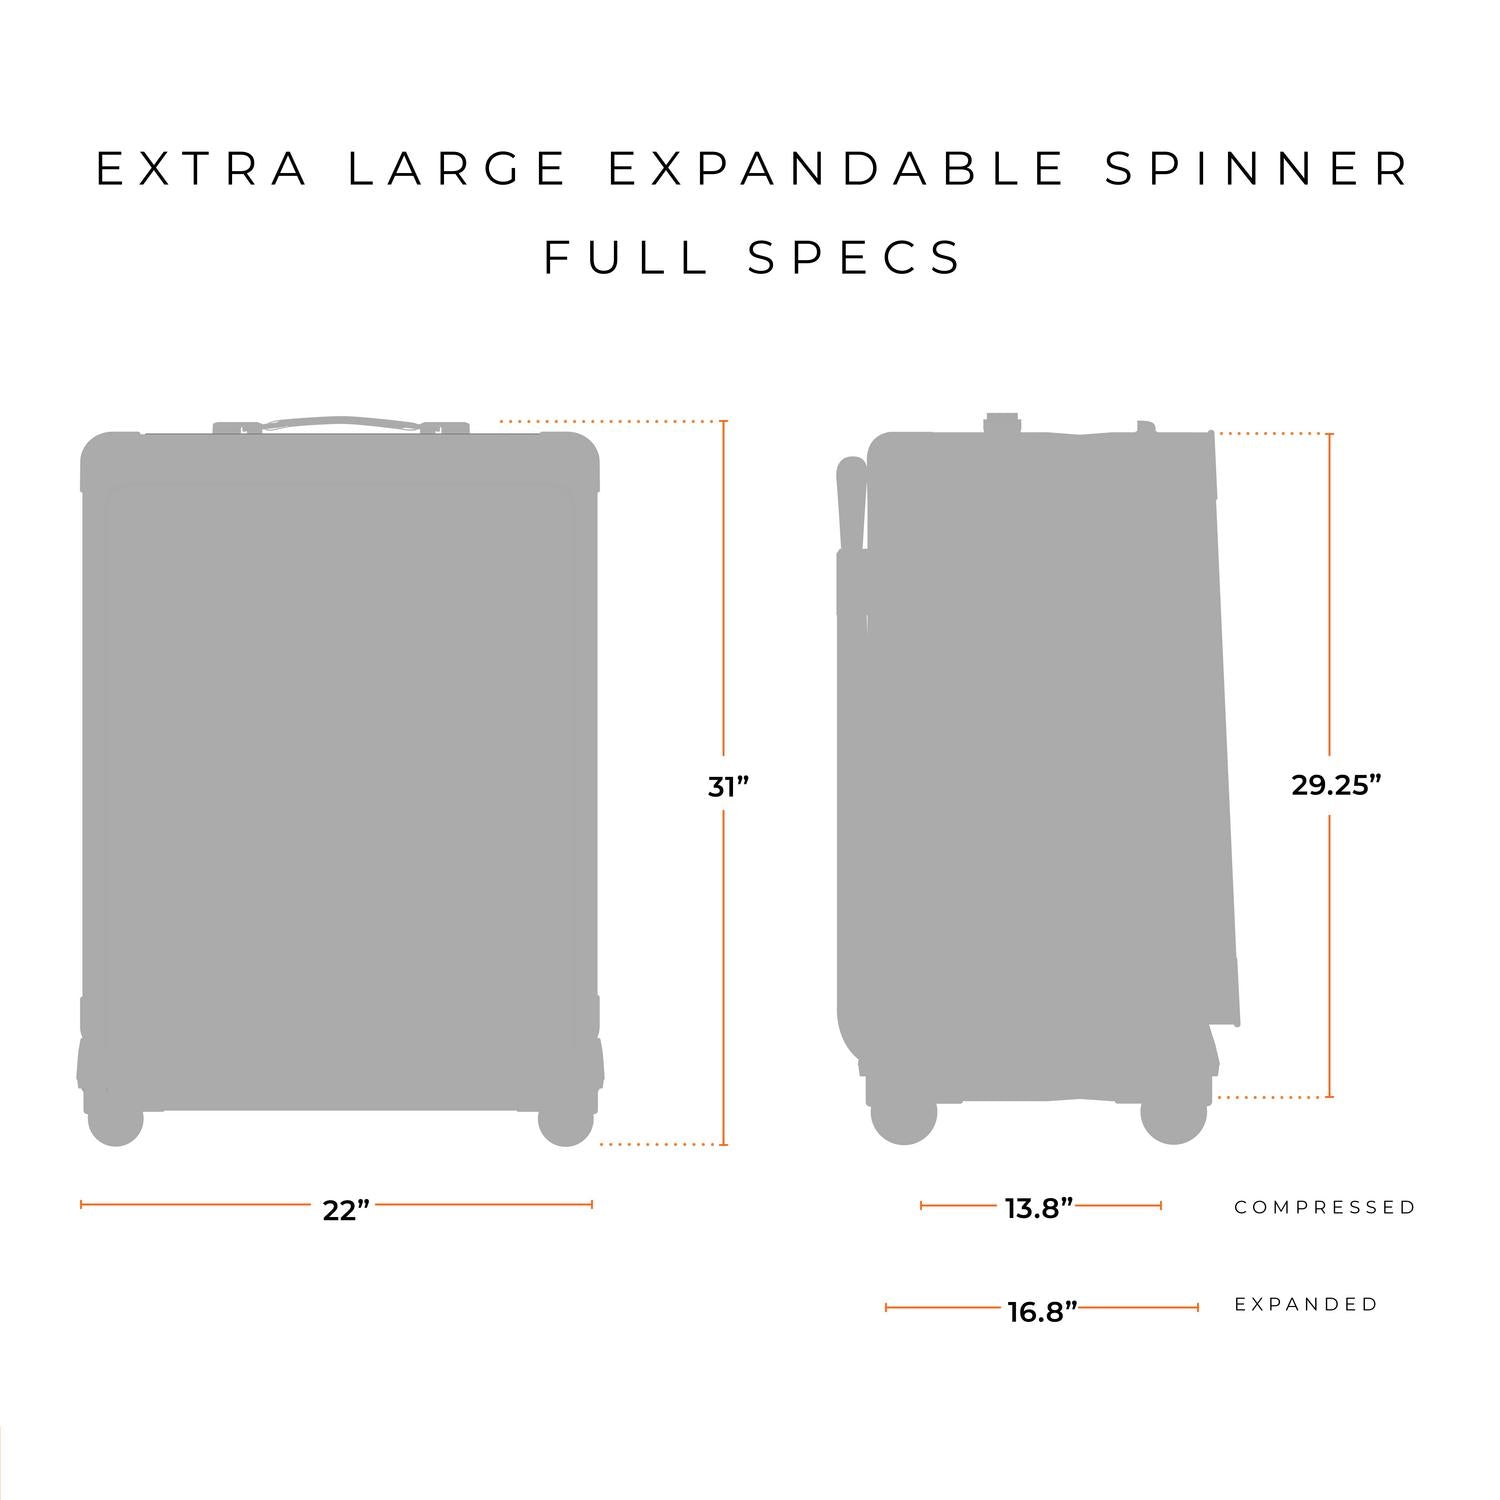 Briggs and Riley Extra Large Expandable Spinner Full Specs 22"x31"x13.8" compressed or 16.8" expanded #color_navy